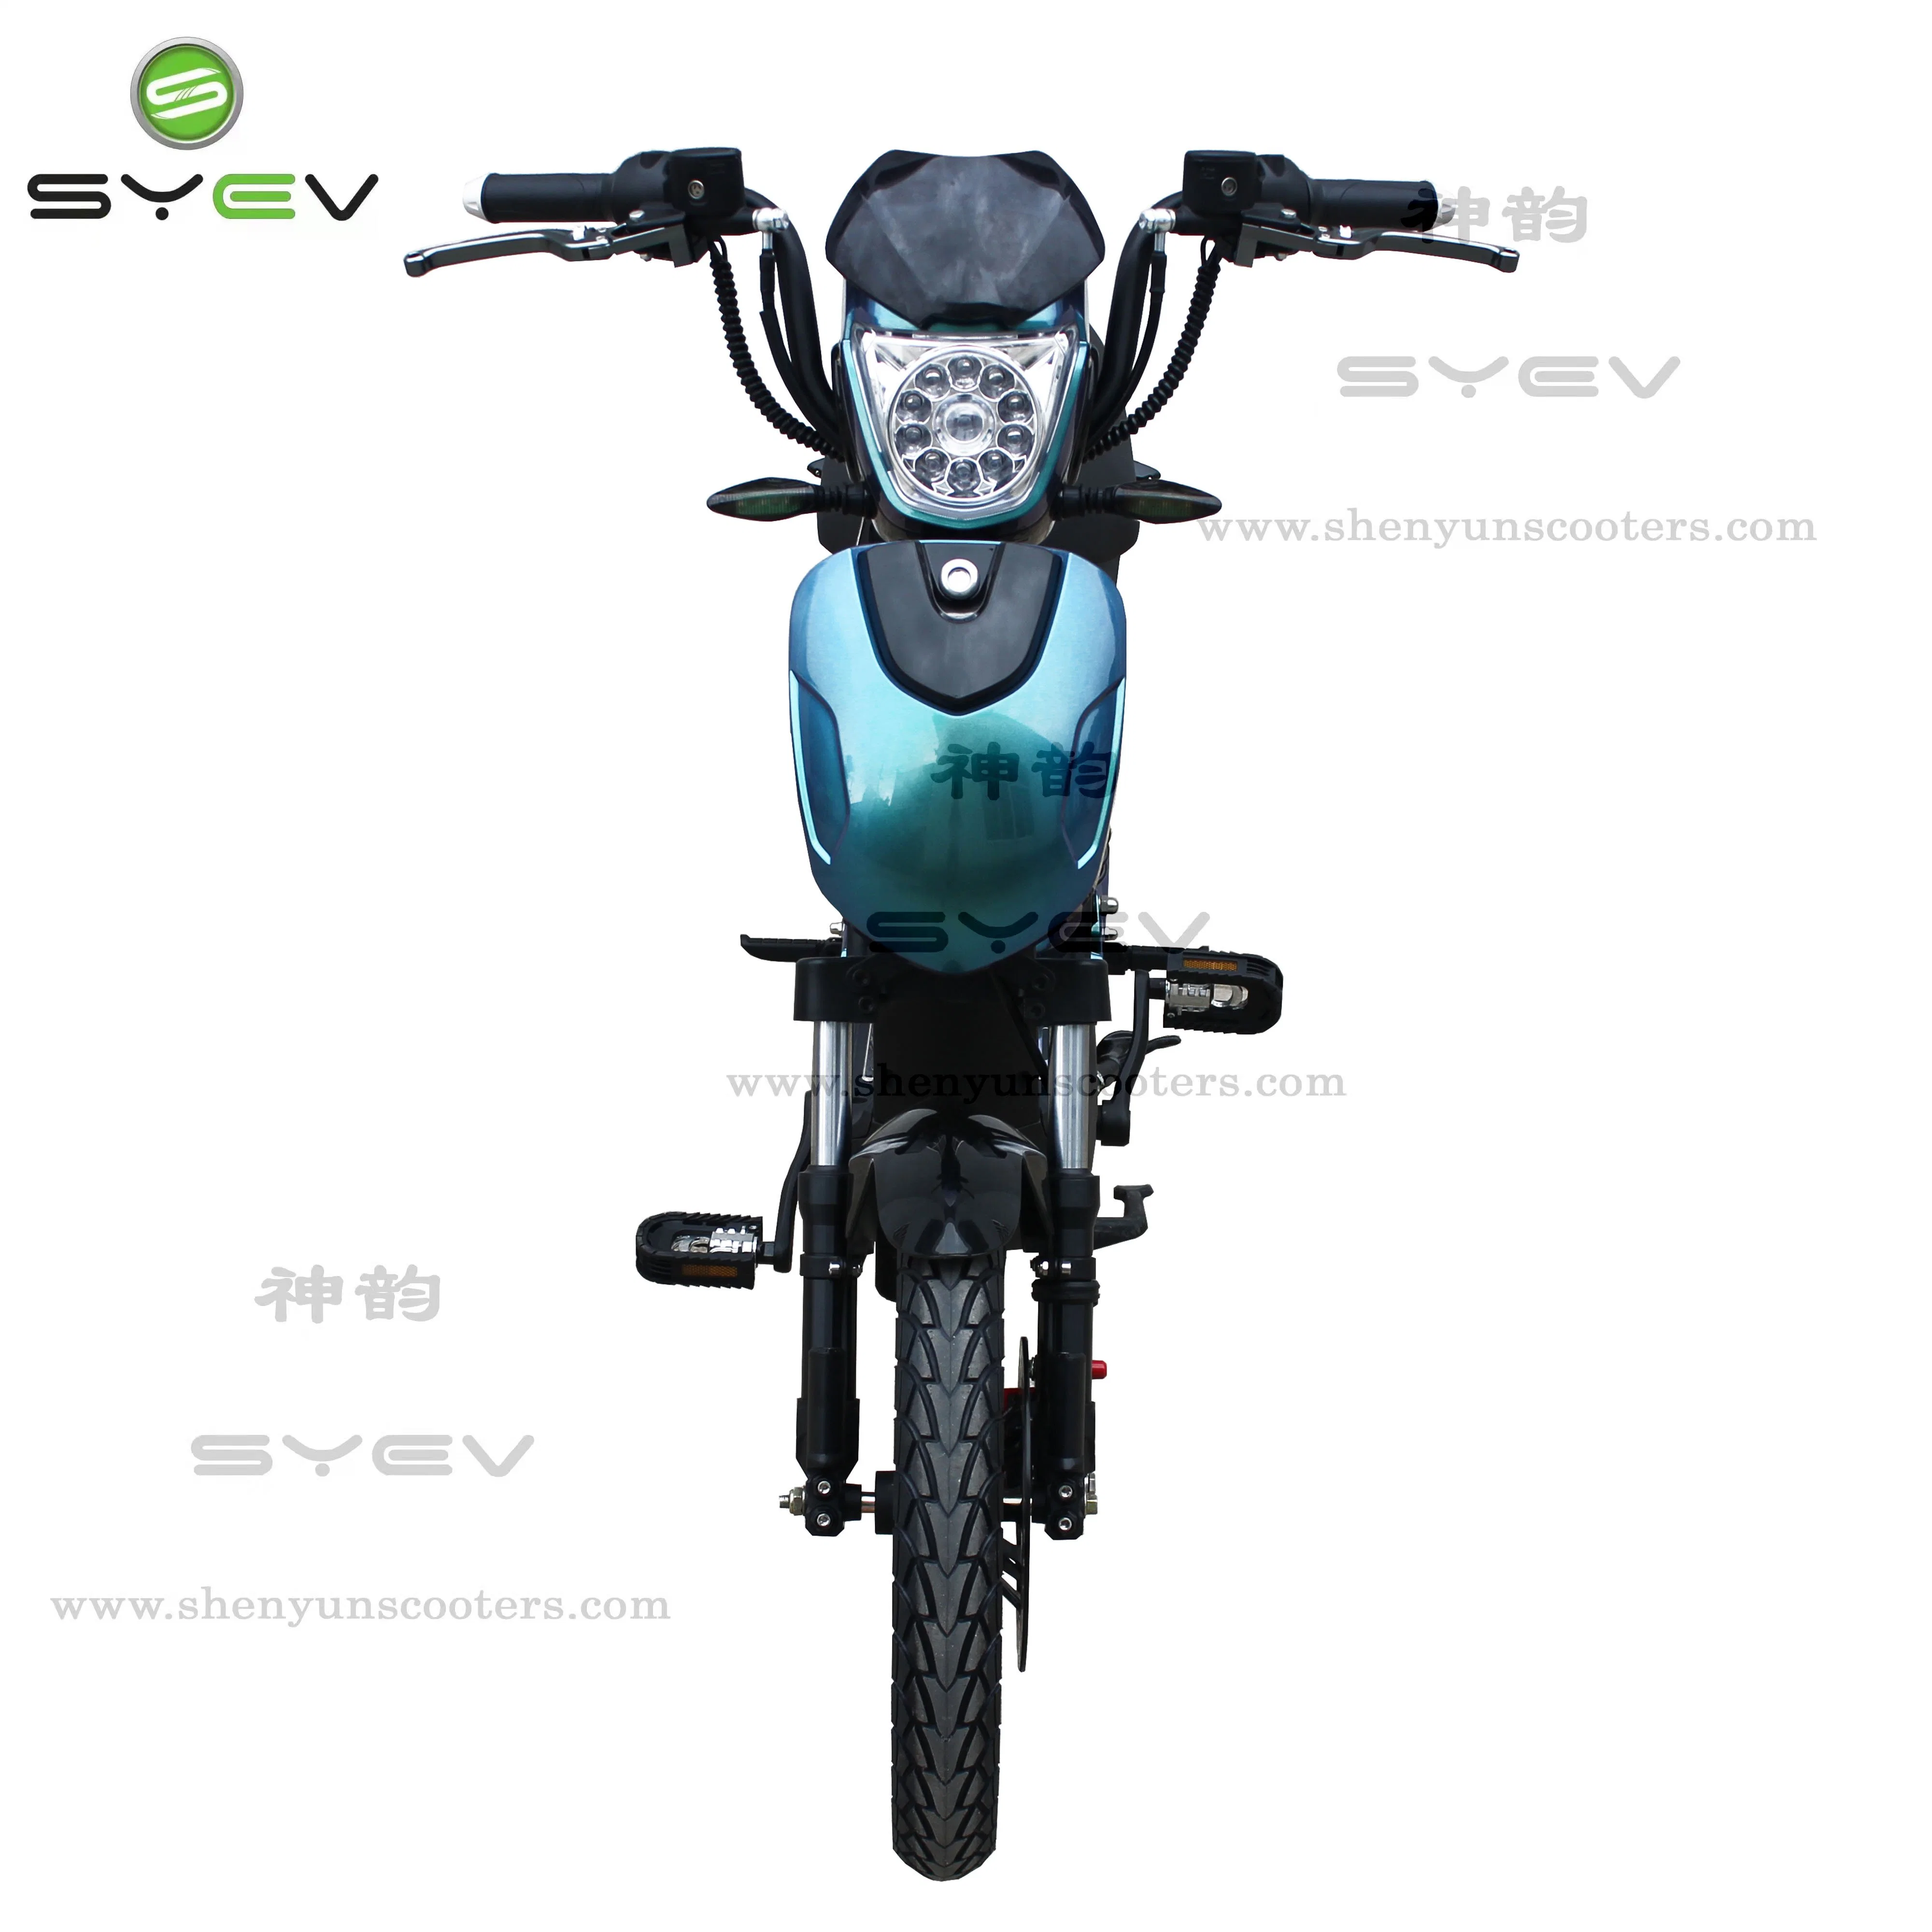 CE/EEC/Coc Shenyun Sy-Lxqs 48V 500W/800W High Performance Steel Motor Scooter Electric Bike with Long Range